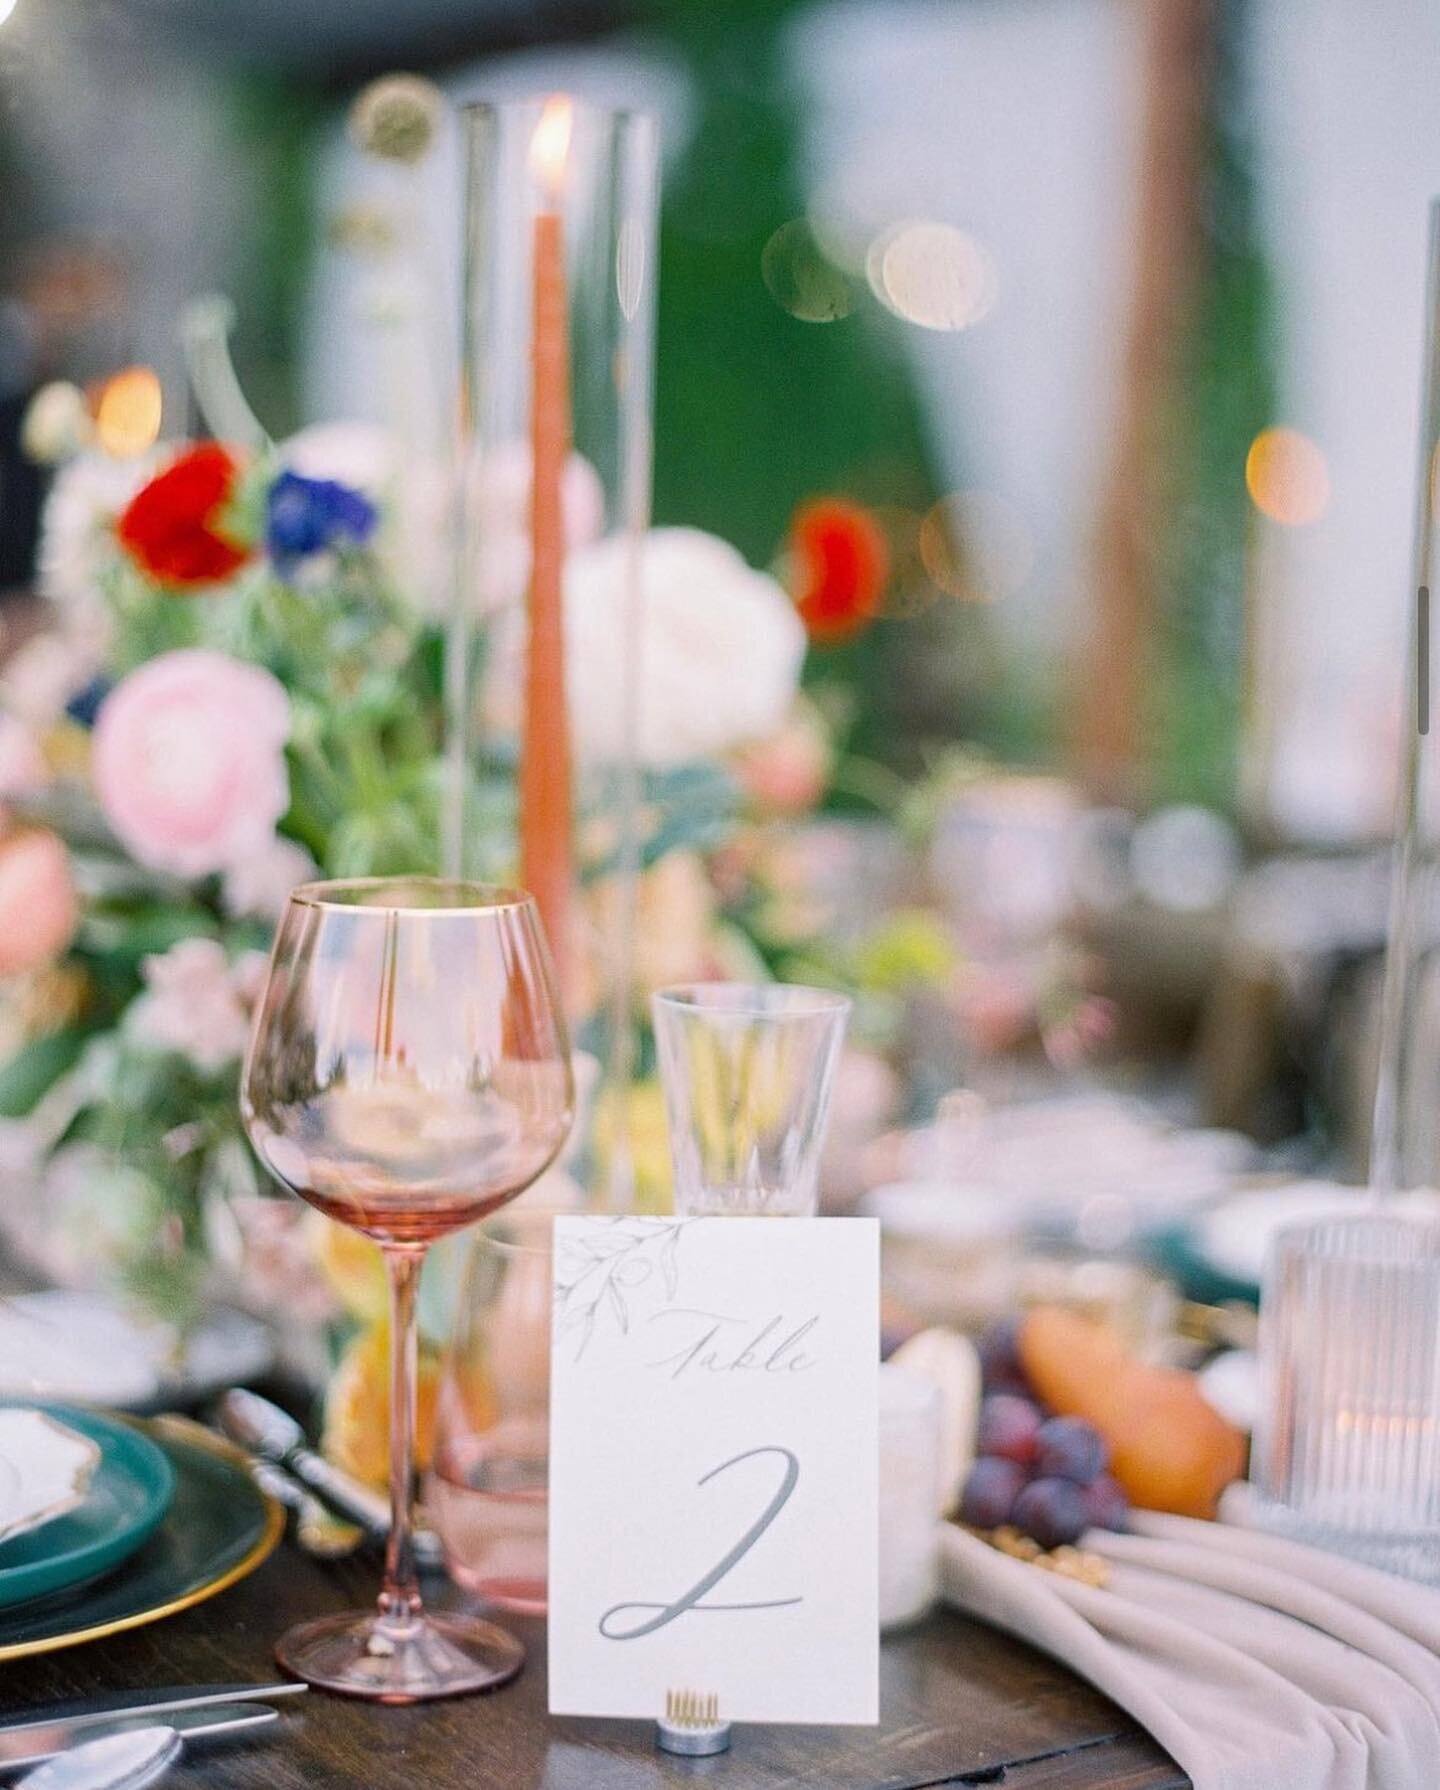 A few of our favorite details from B+F&rsquo;s @lacasatoscana reception that have us daydreaming of a European vacation. Mentally we&rsquo;re there! 🍇🥖🍨
&bull;
&bull;
&bull;
Publication: @martha_weddings 
Planning + design: @sbsweddings 
Photograp